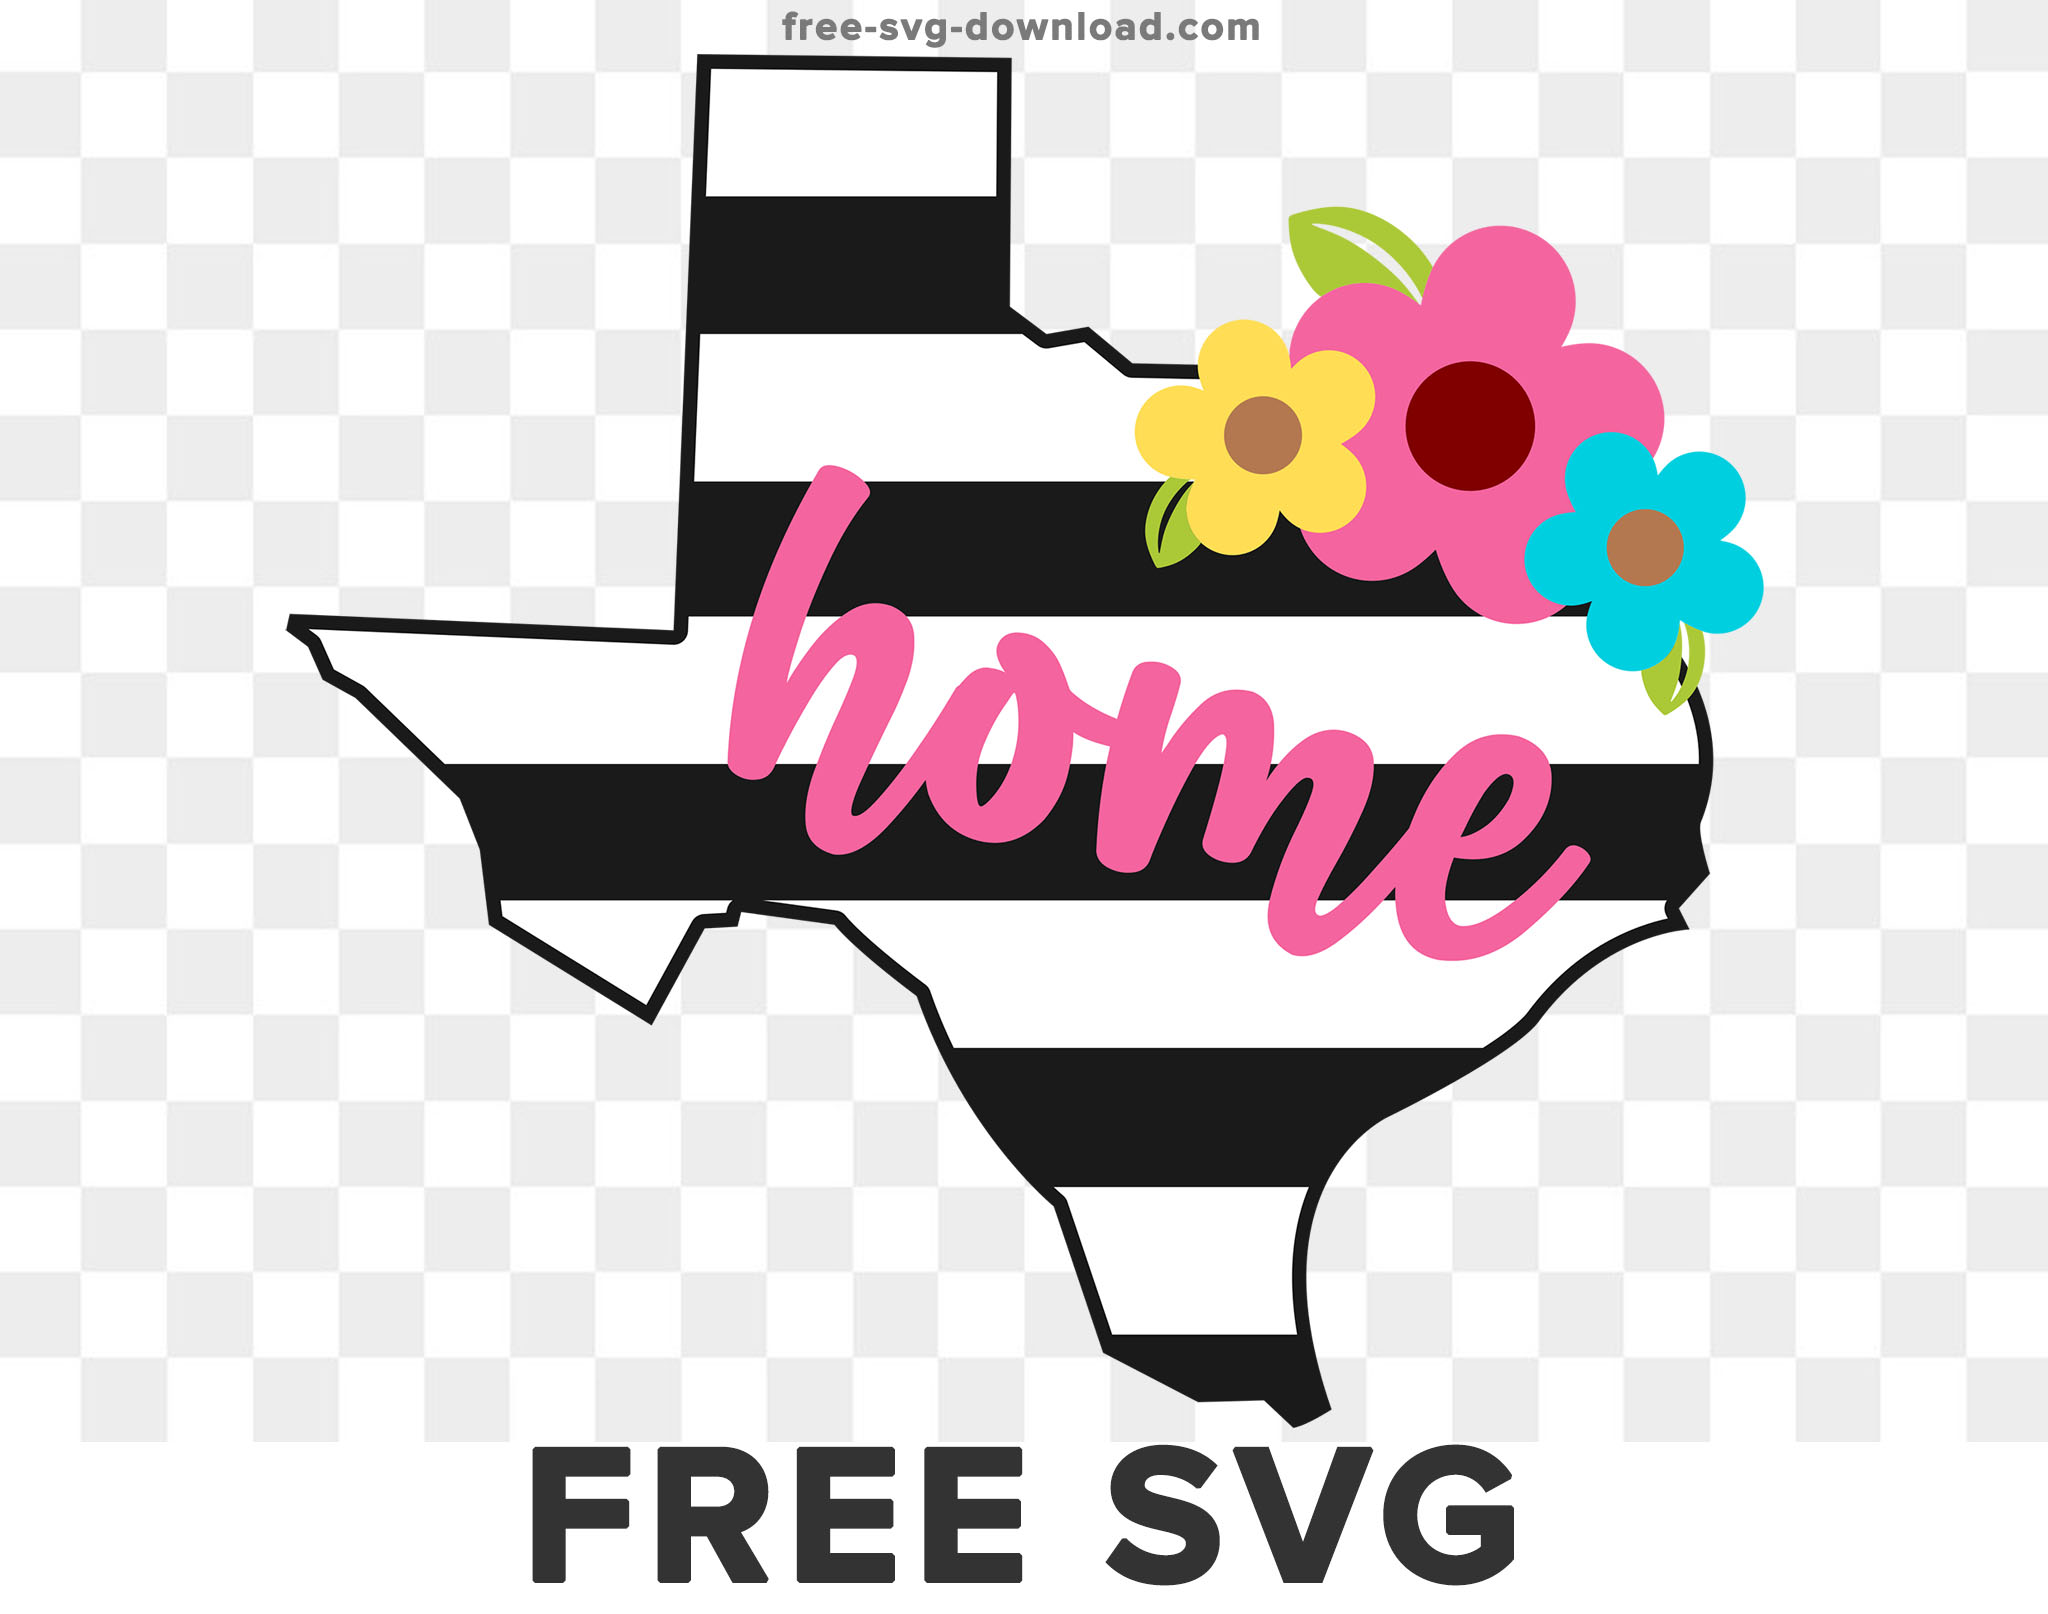 Download Svg Archives Page 4 Of 5 Free Svg Download